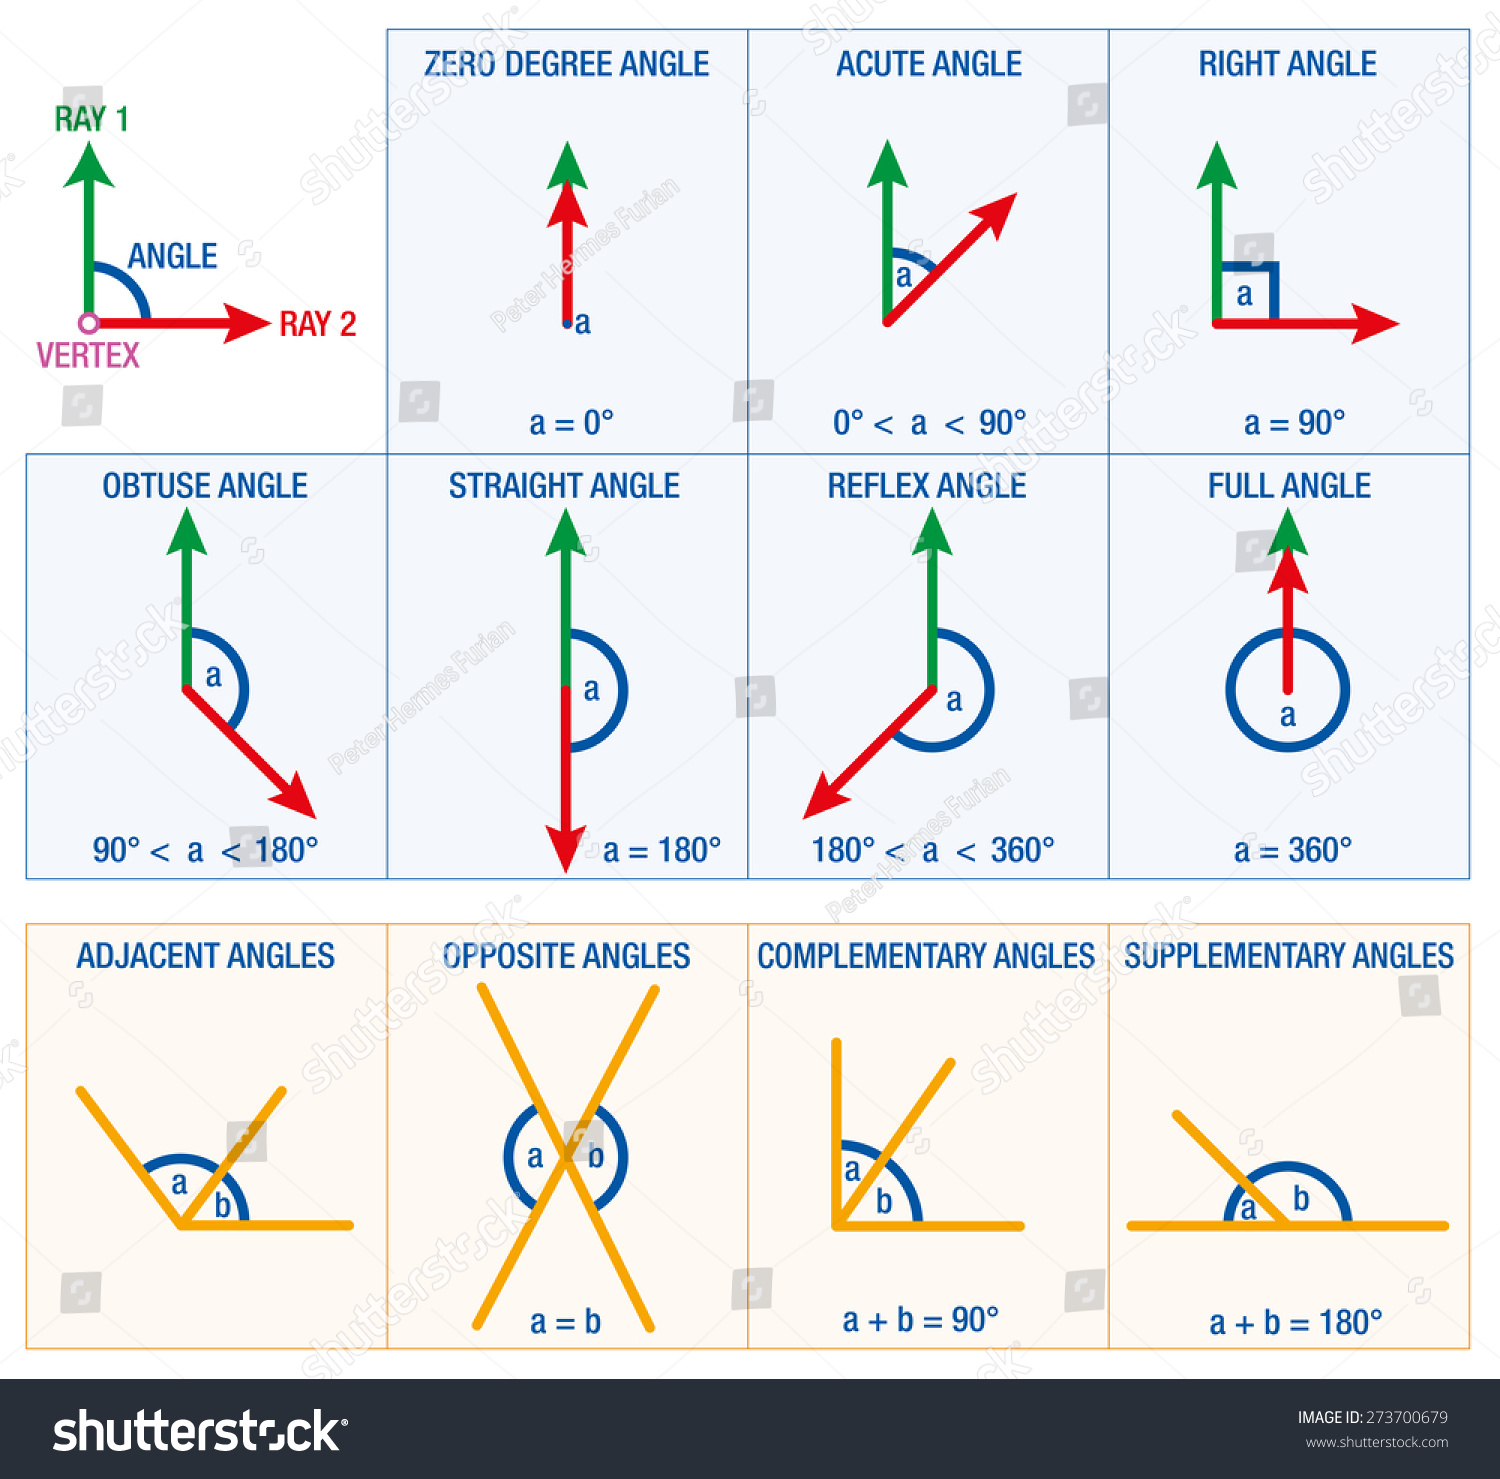 SVG of Angles from geometry and mathematics science, like ACUTE ANGLE, RIGHT ANGLE or REFLEX ANGLE, a summary of the possible angles plus numeral angular degree data. Vector illustration on white background. svg